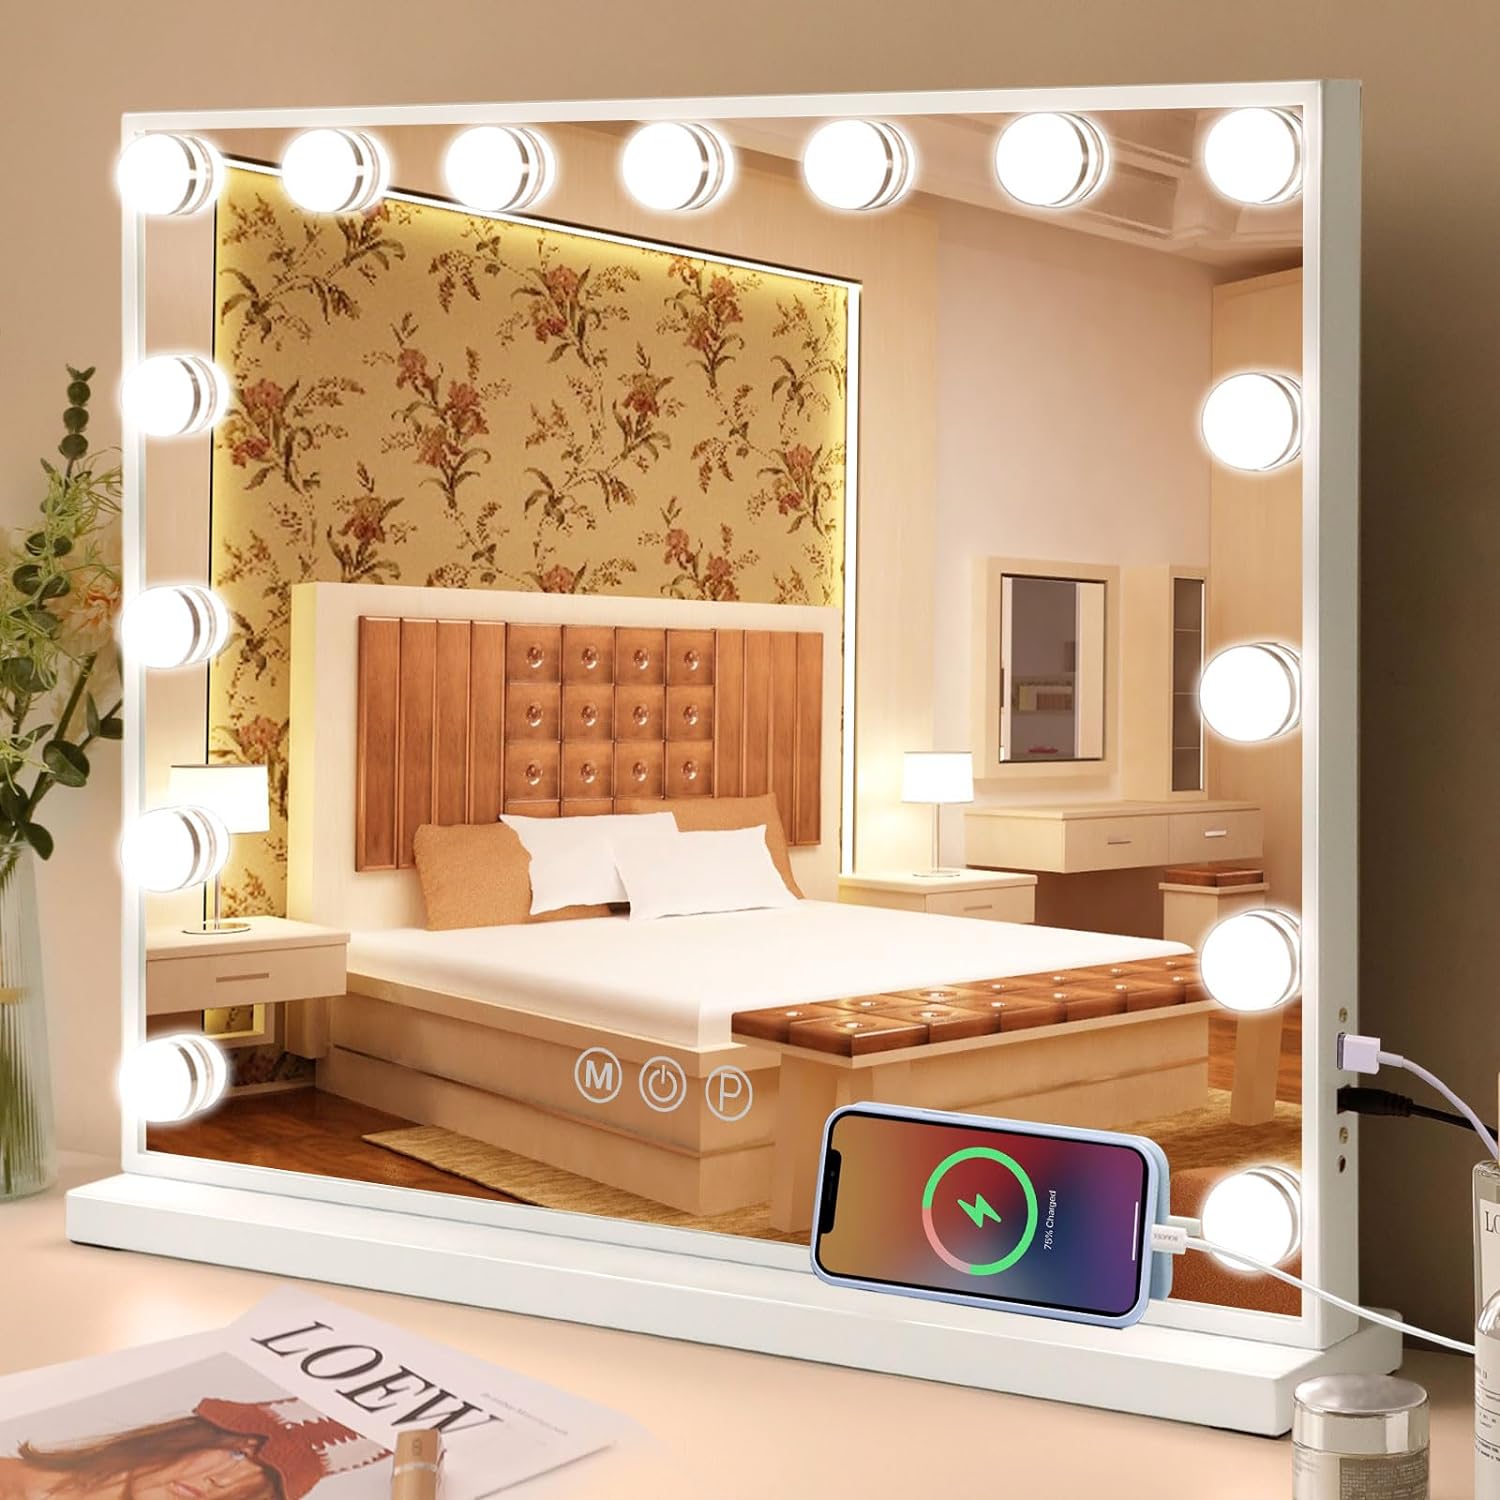 Fenair Vanity Mirror with Lights 22.8x 18.1 Makeup Mirror with Lights and 15 Dimmable Bulbs,3 Colors Modes,Hollywood Mirror with USB Charging Port and 10X Detachable Magnification Mirror